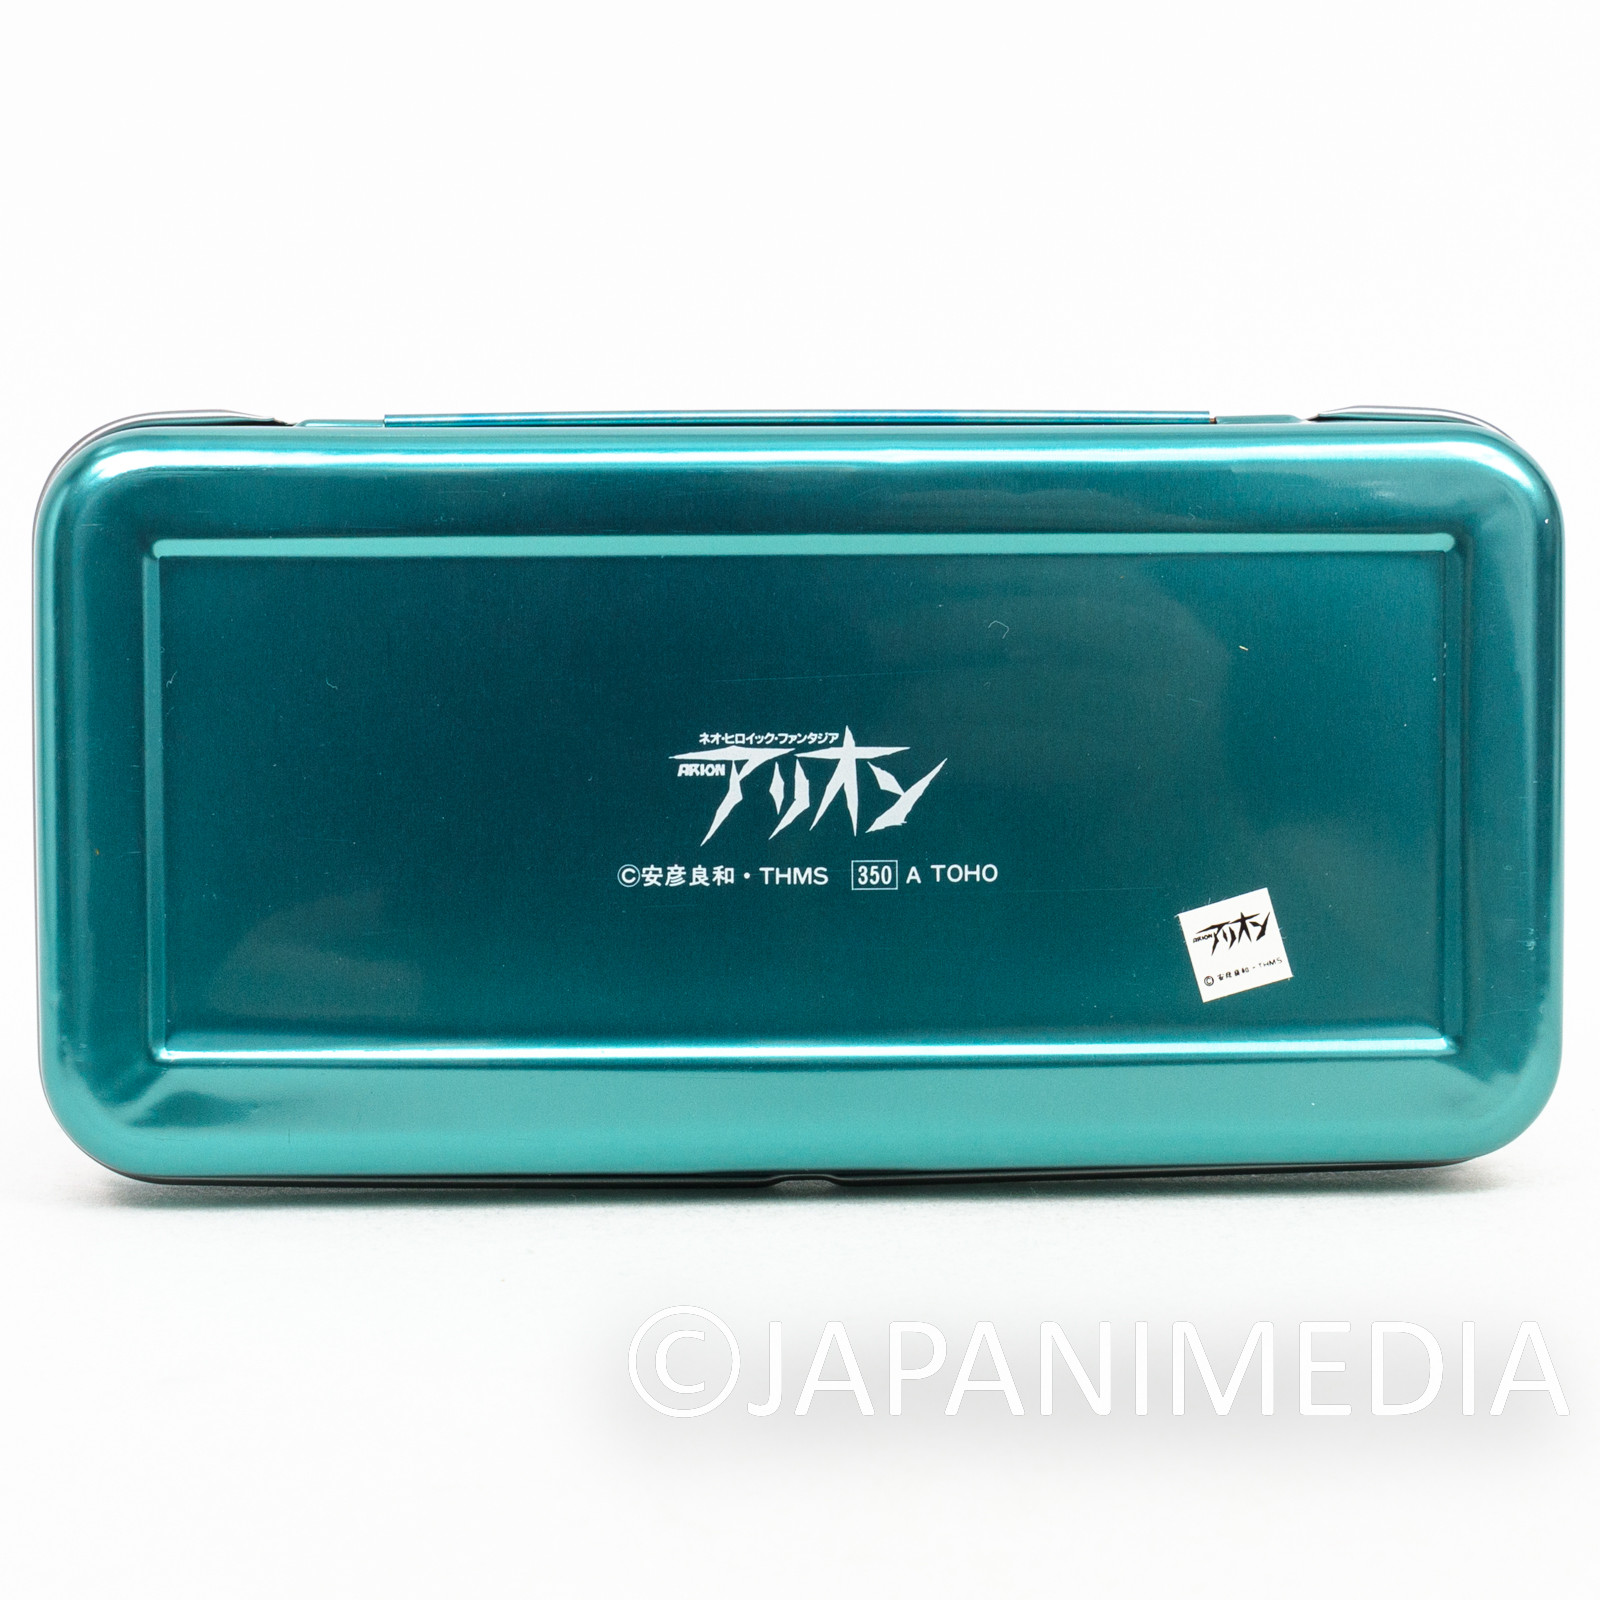 ARION Can Pen Case Animage JAPAN ANIME 2